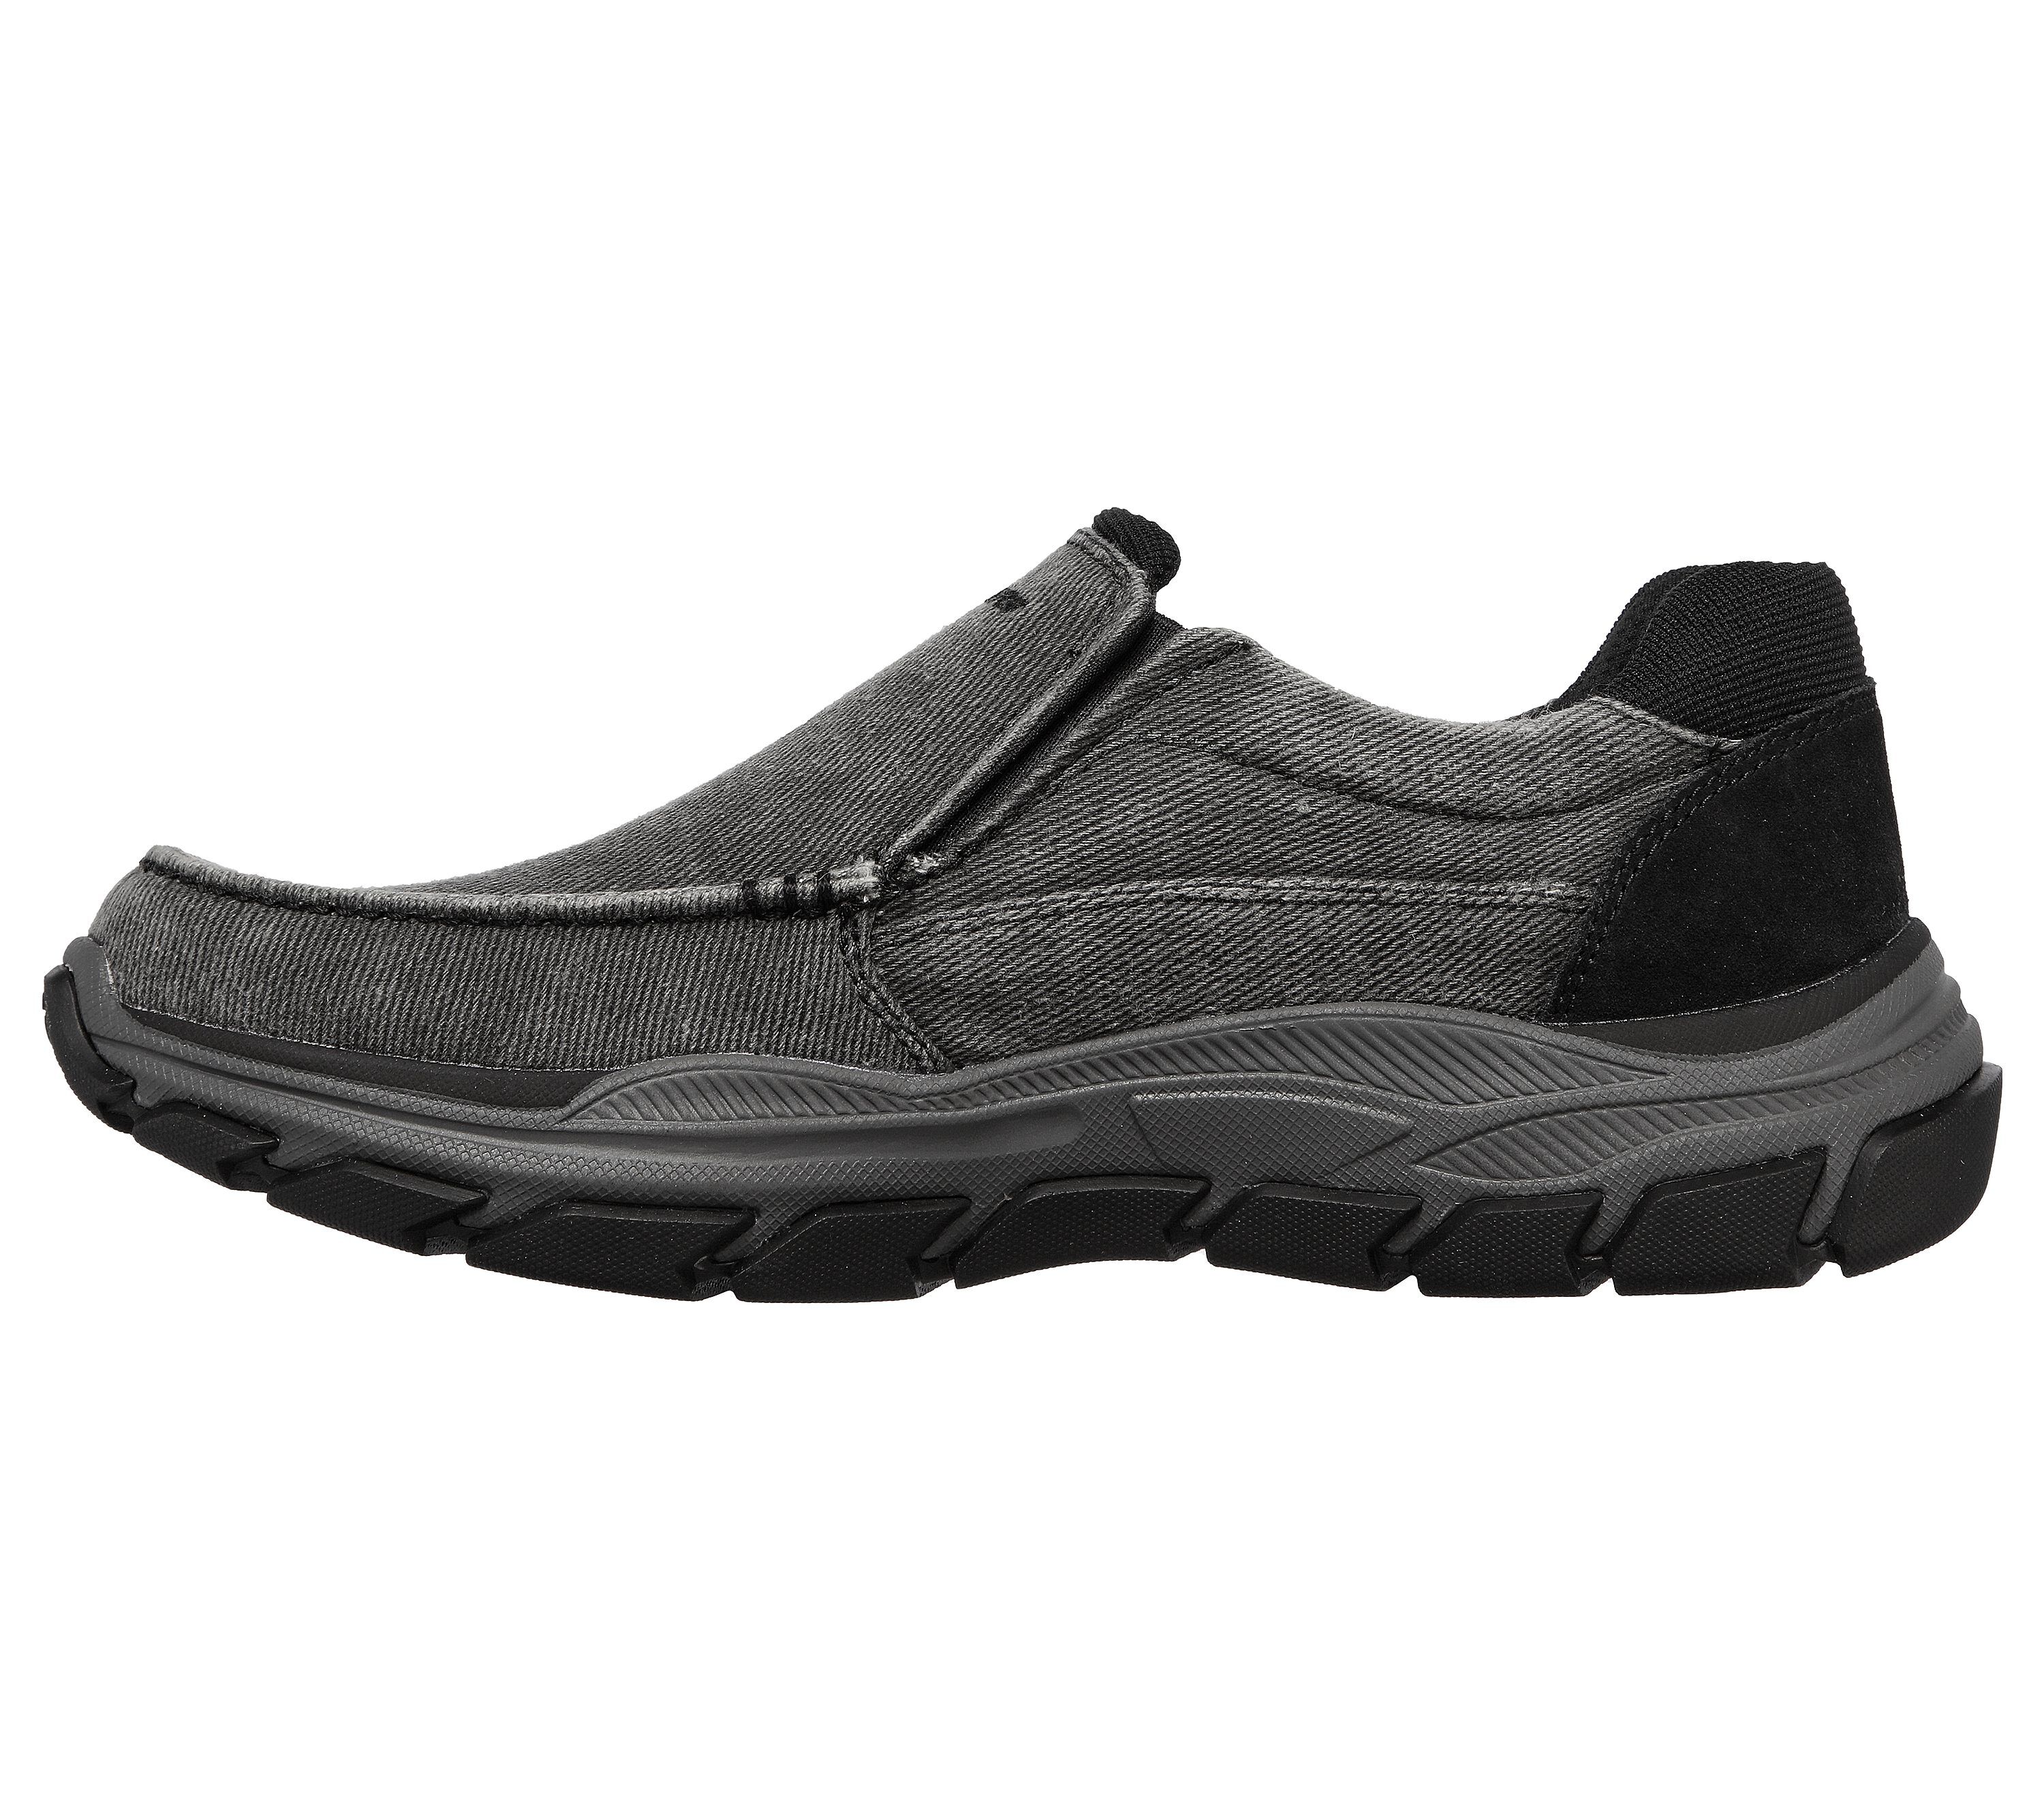 Shop the Relaxed Fit: Respected - Vergo | SKECHERS